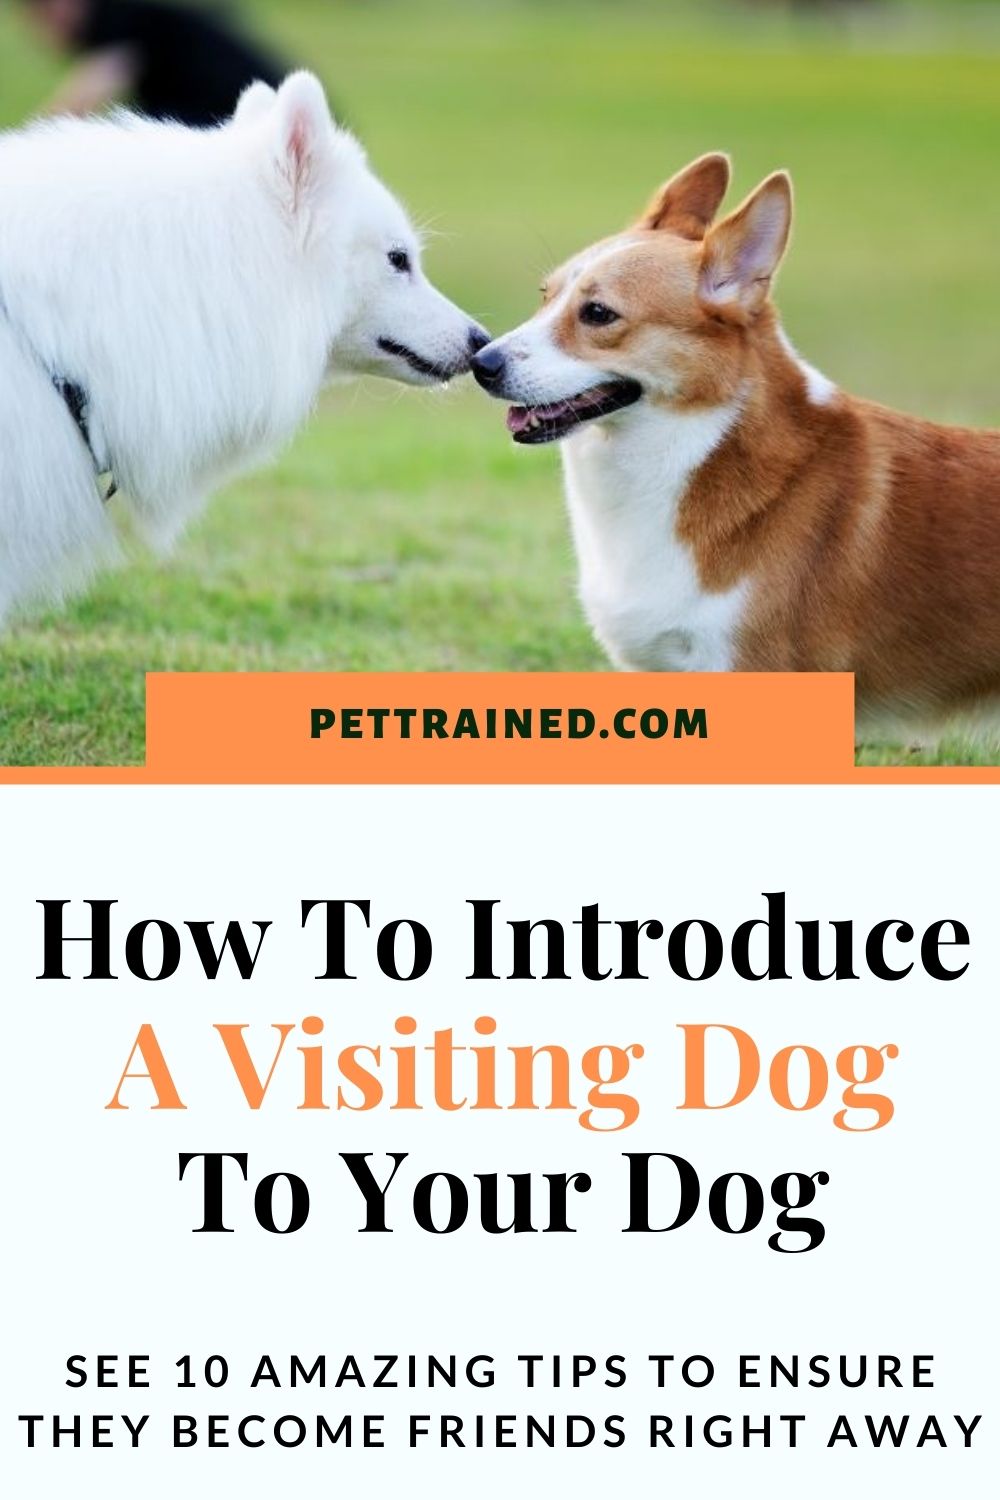 How to introduce one dog to another